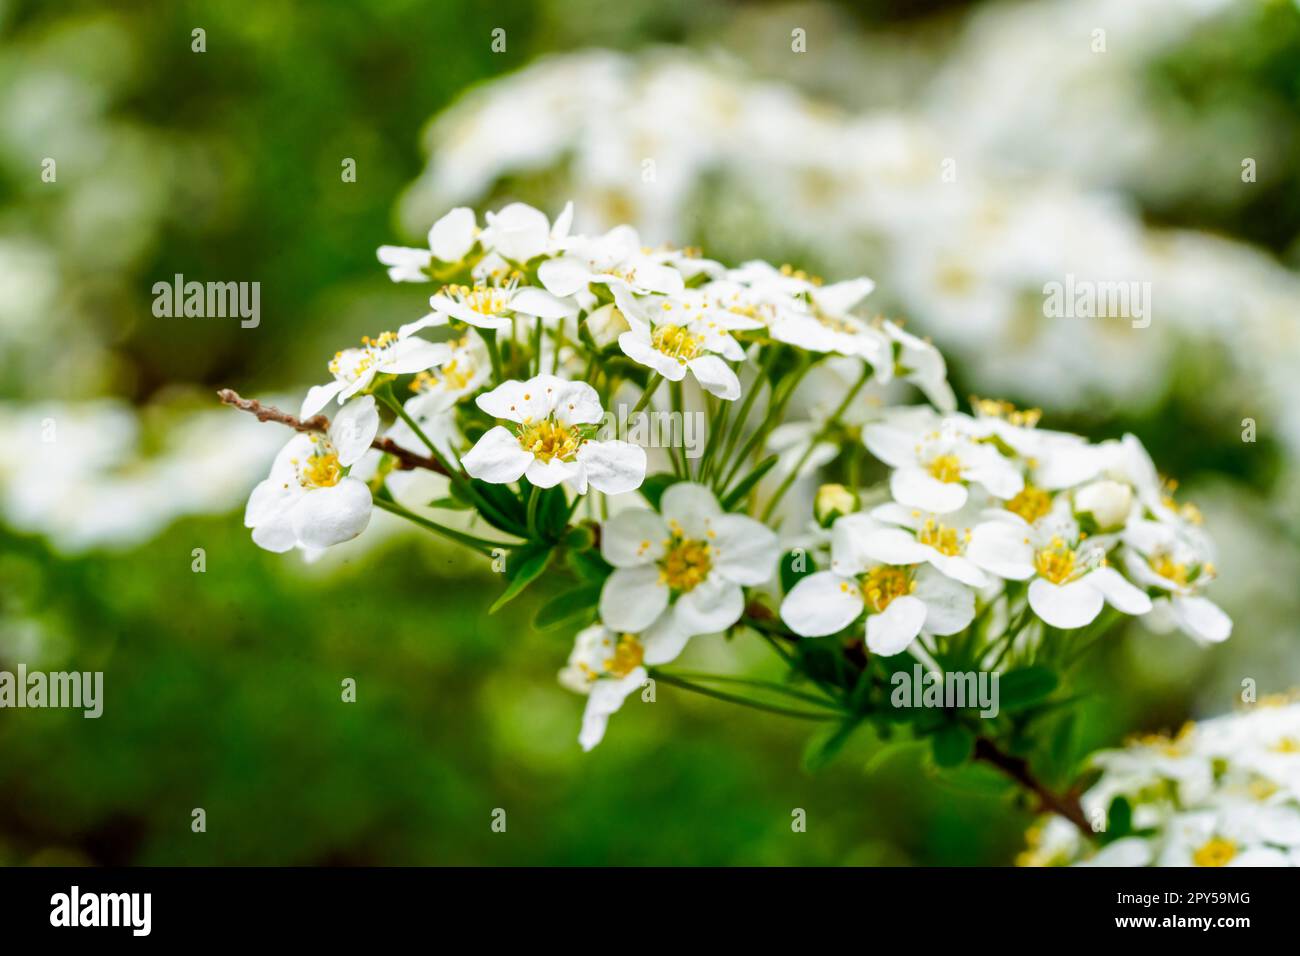 A close up of the mass of white flowers on a Spirea shrub Stock Photo